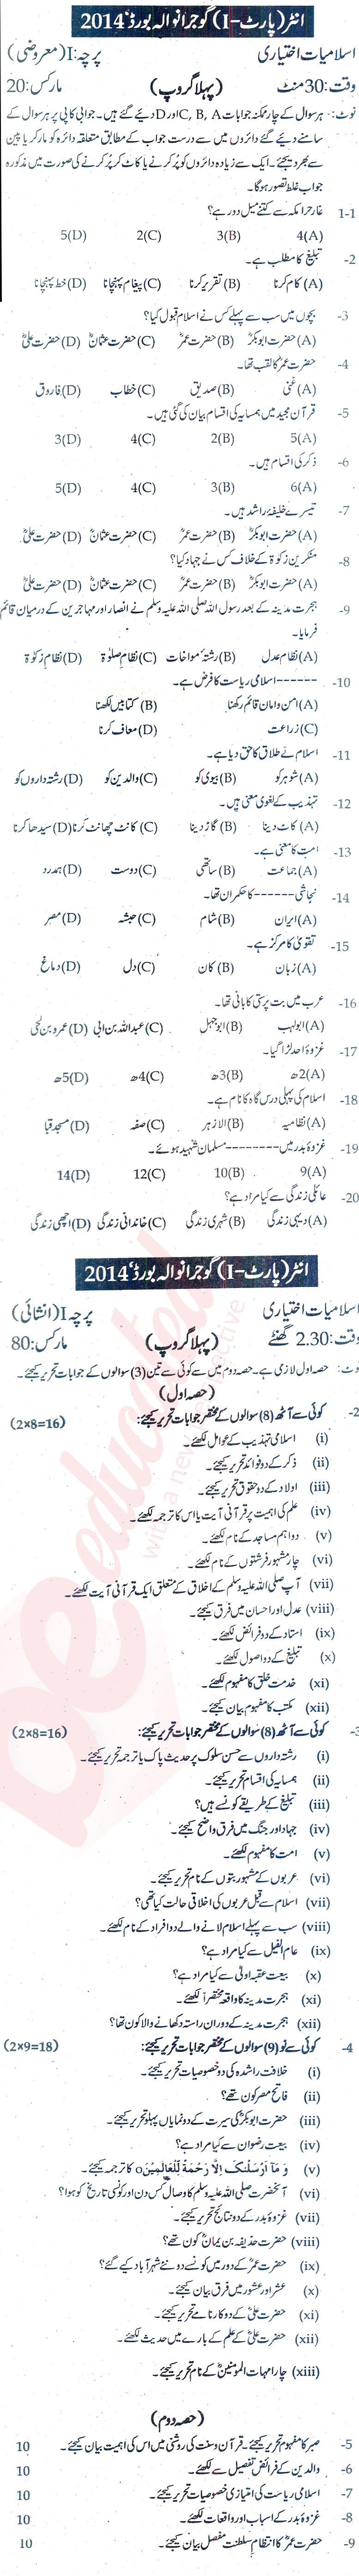 Islamiat Elective FA Part 1 Past Paper Group 1 BISE Gujranwala 2014